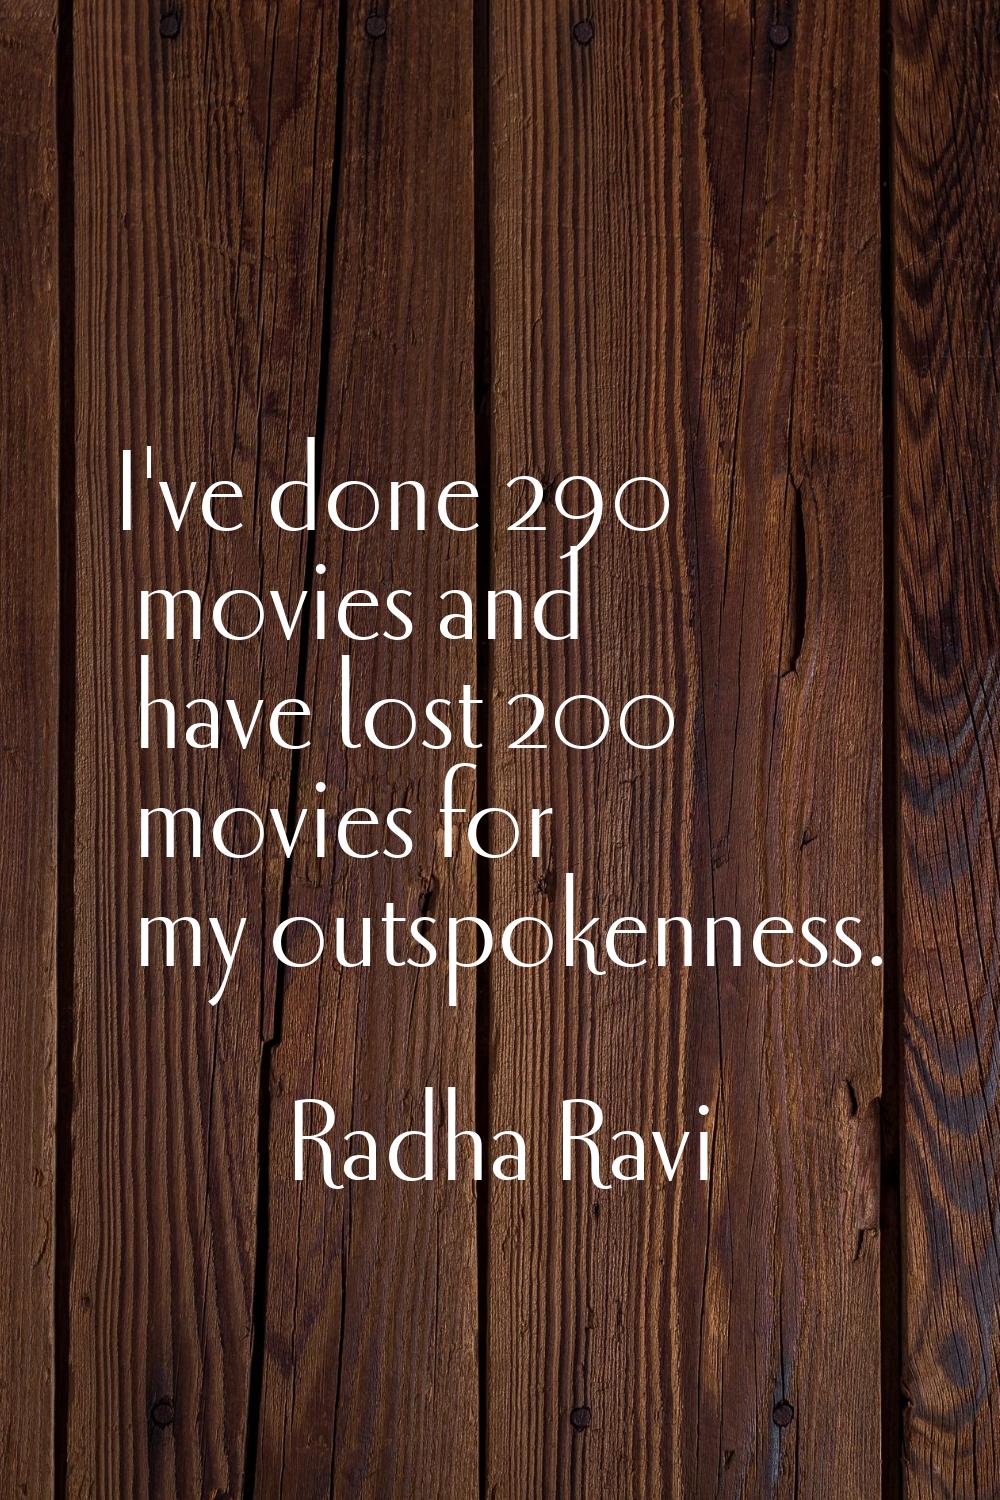 I've done 290 movies and have lost 200 movies for my outspokenness.